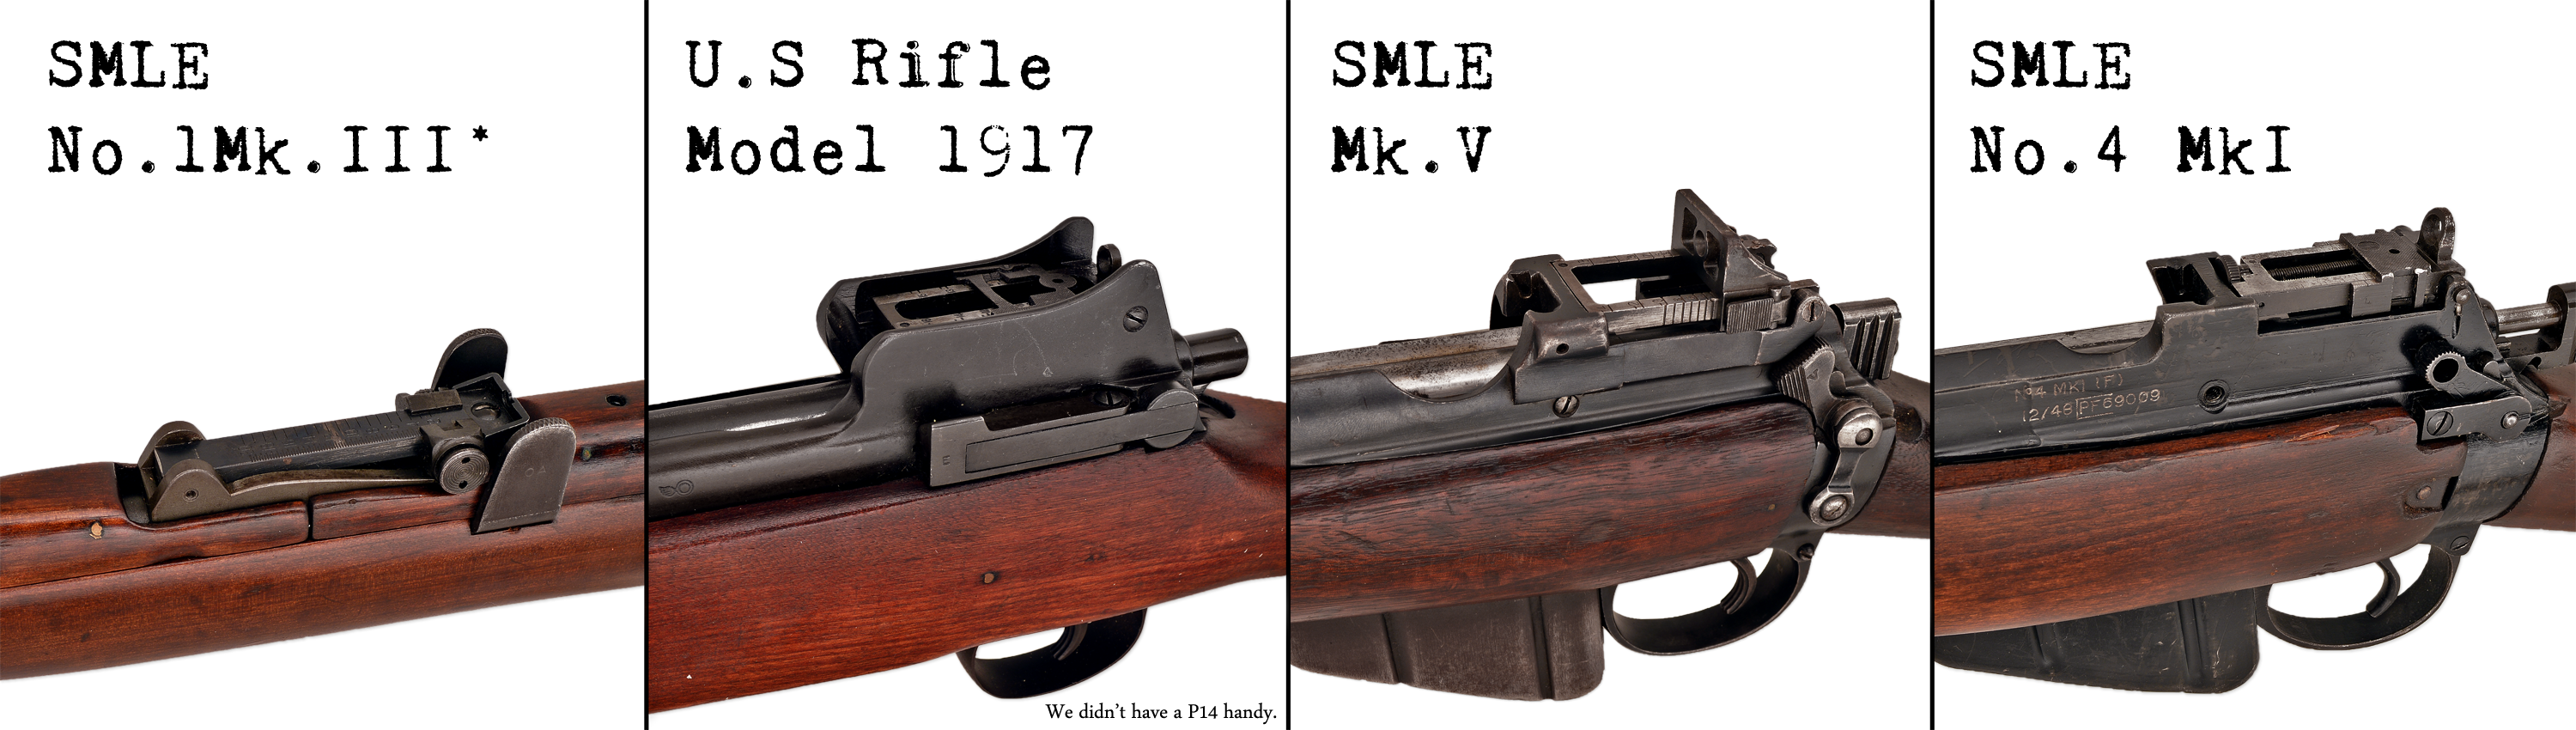 Lee Enfield Mk Iii Rifle Pics, Weapons Collection